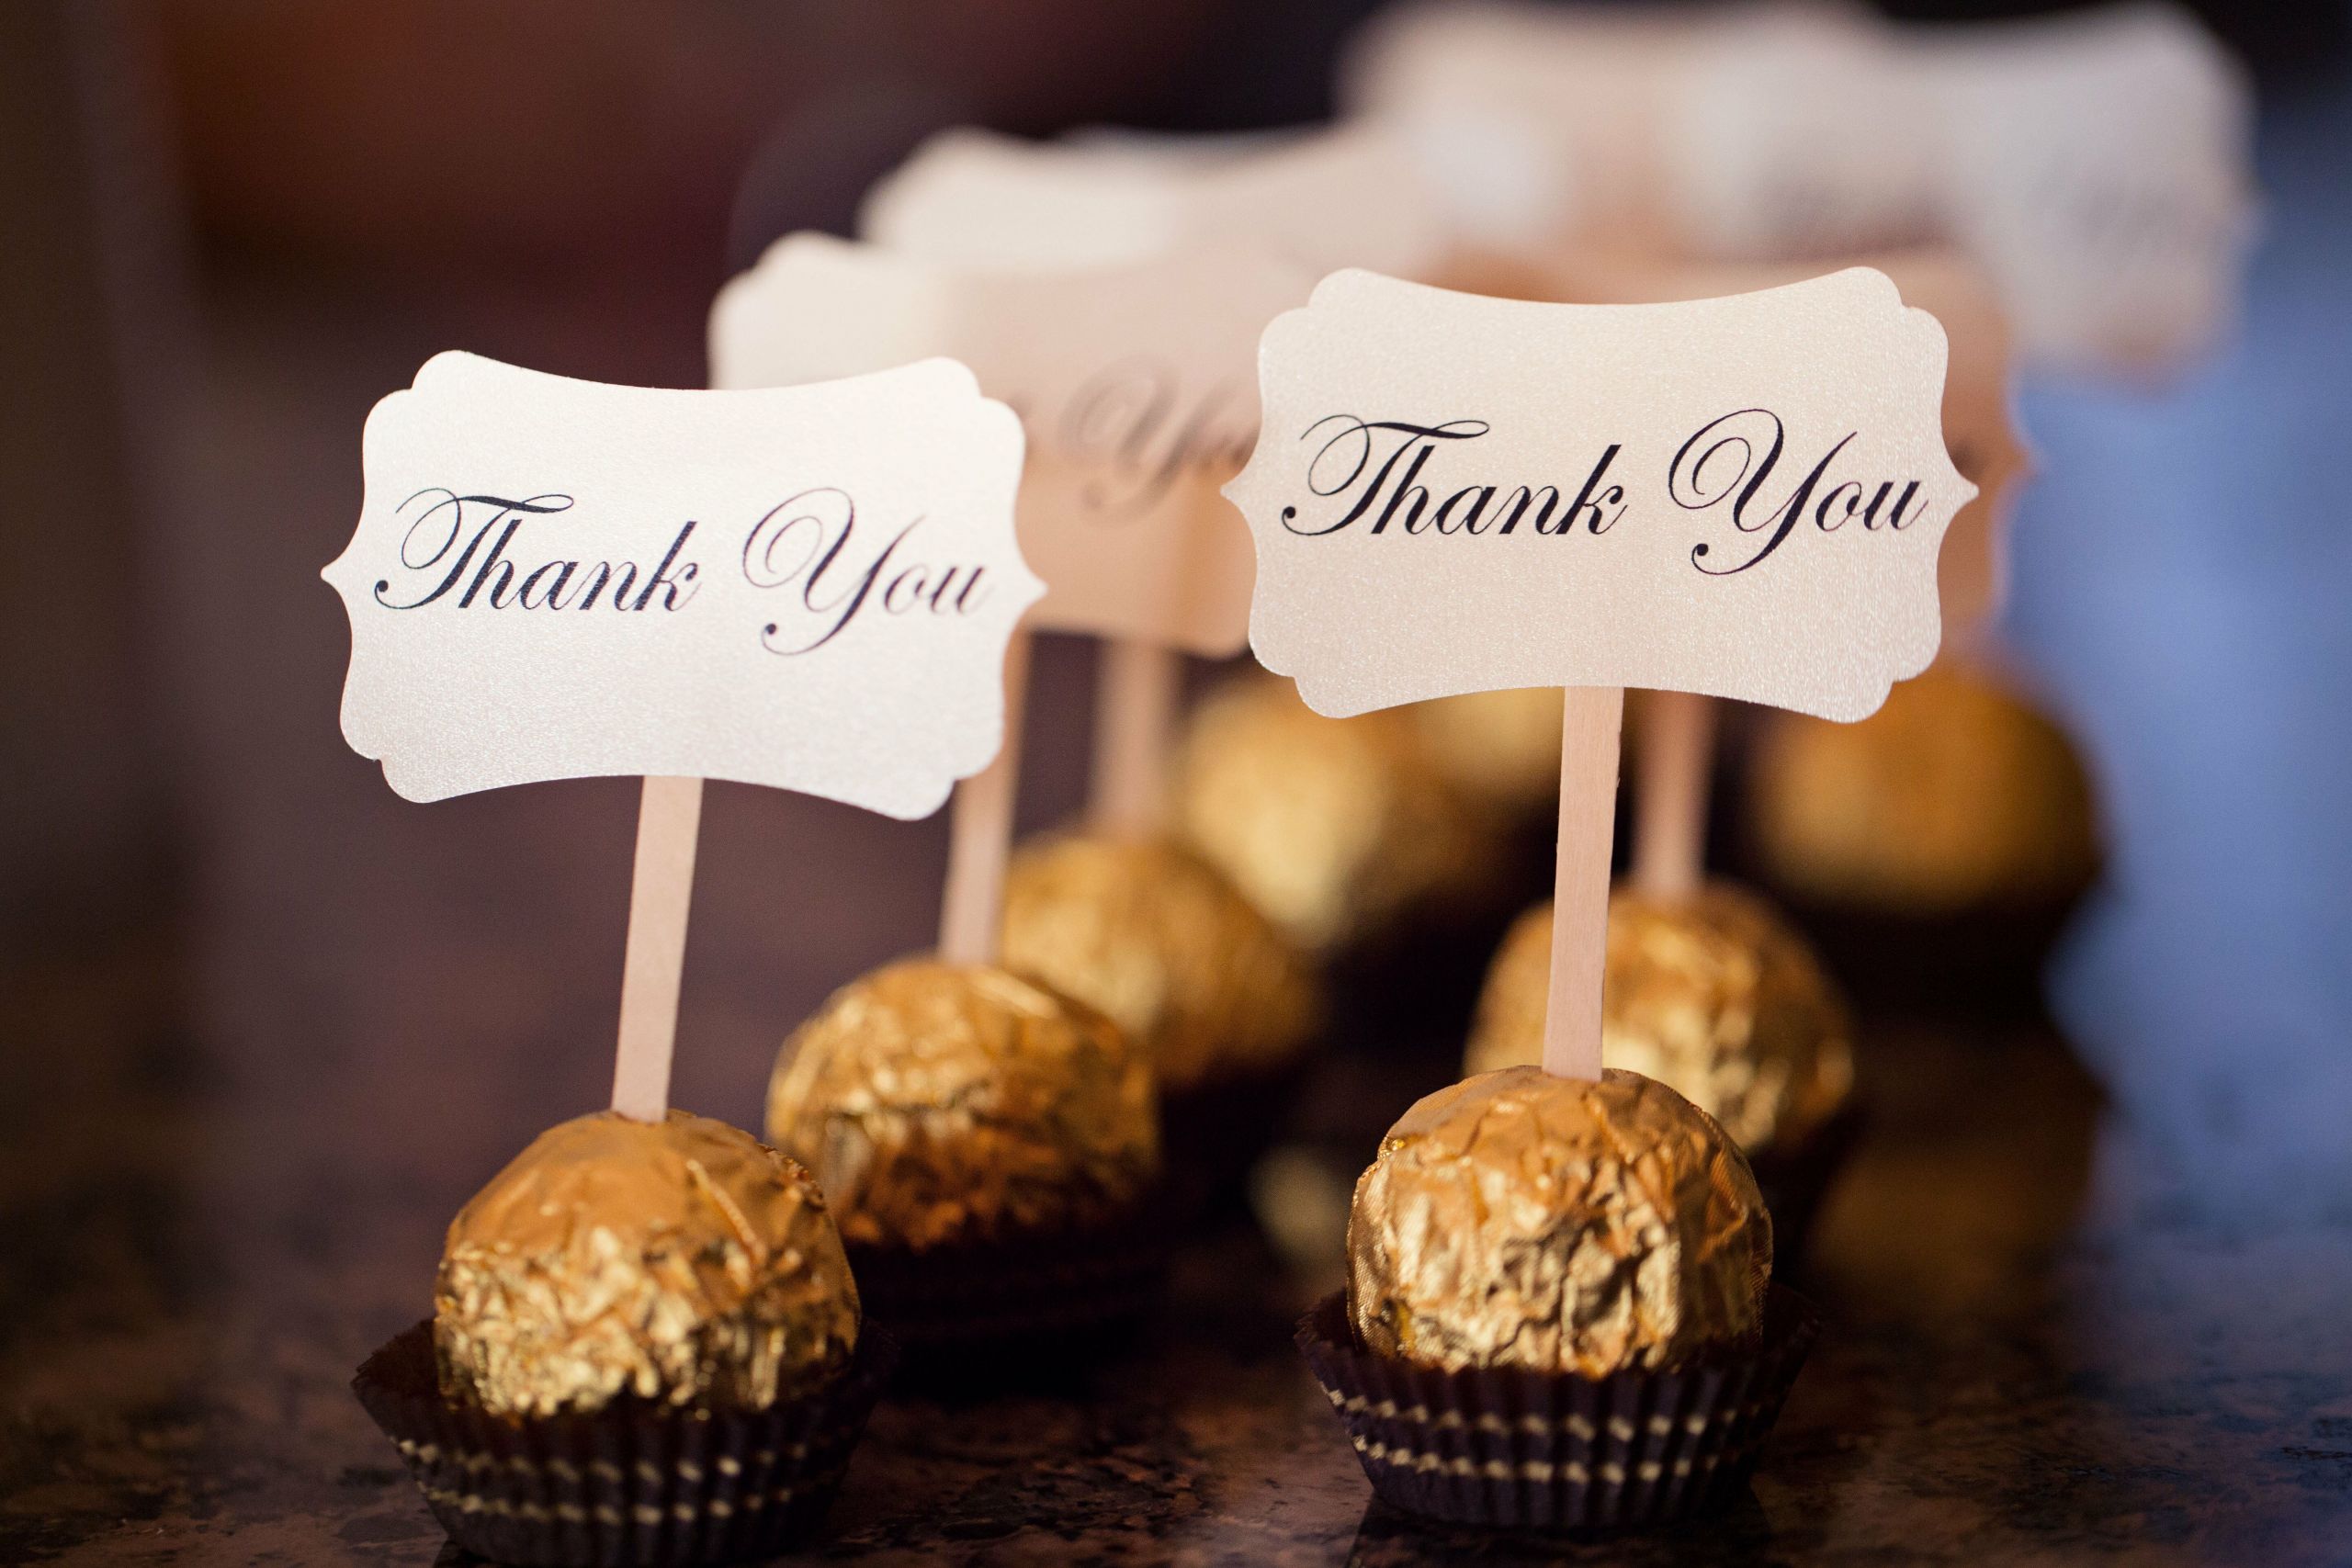 Gift Ideas For A Wedding
 Chocolate Favors